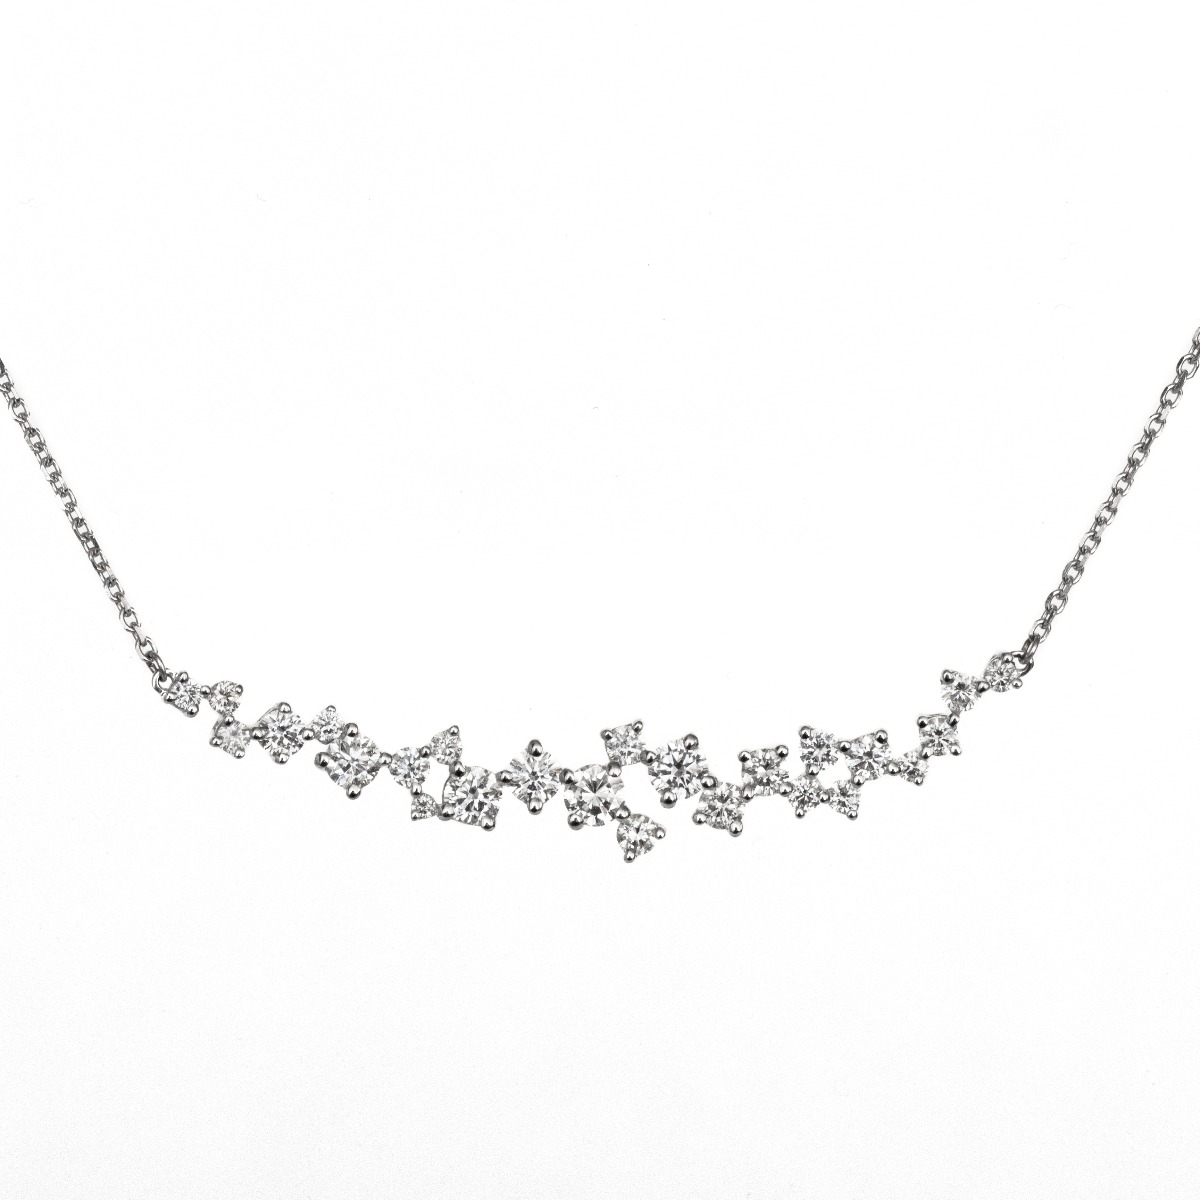 Scattered Diamond Bar Necklace in 14k White Gold